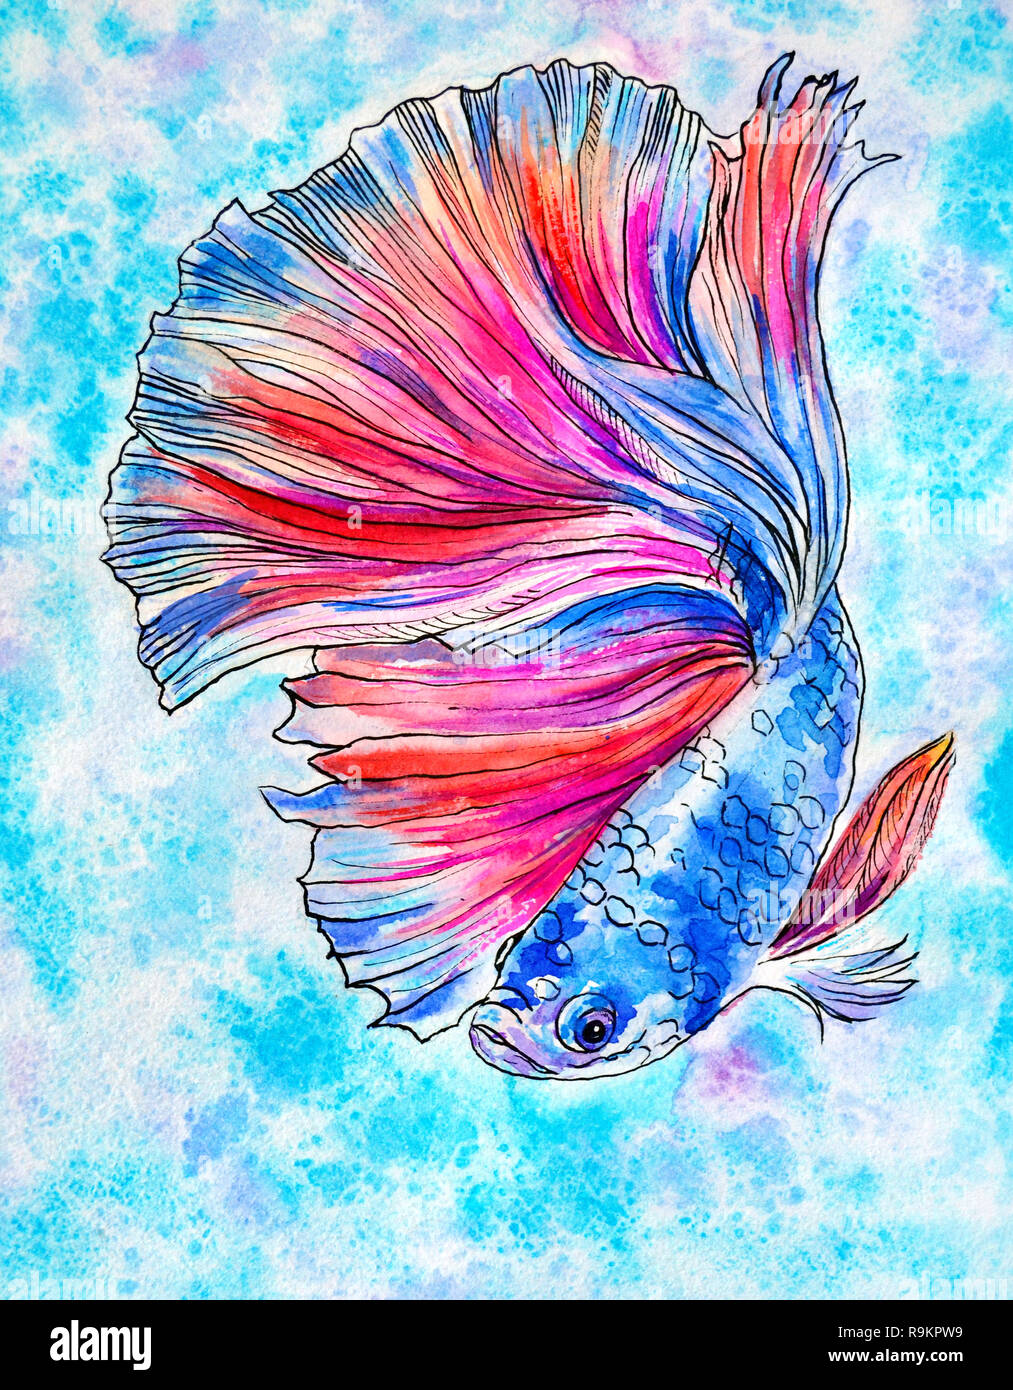 https://c8.alamy.com/comp/R9KPW9/blue-colored-magic-fish-swims-on-a-turquoise-background-illustration-drawn-in-watercolor-and-ink-R9KPW9.jpg